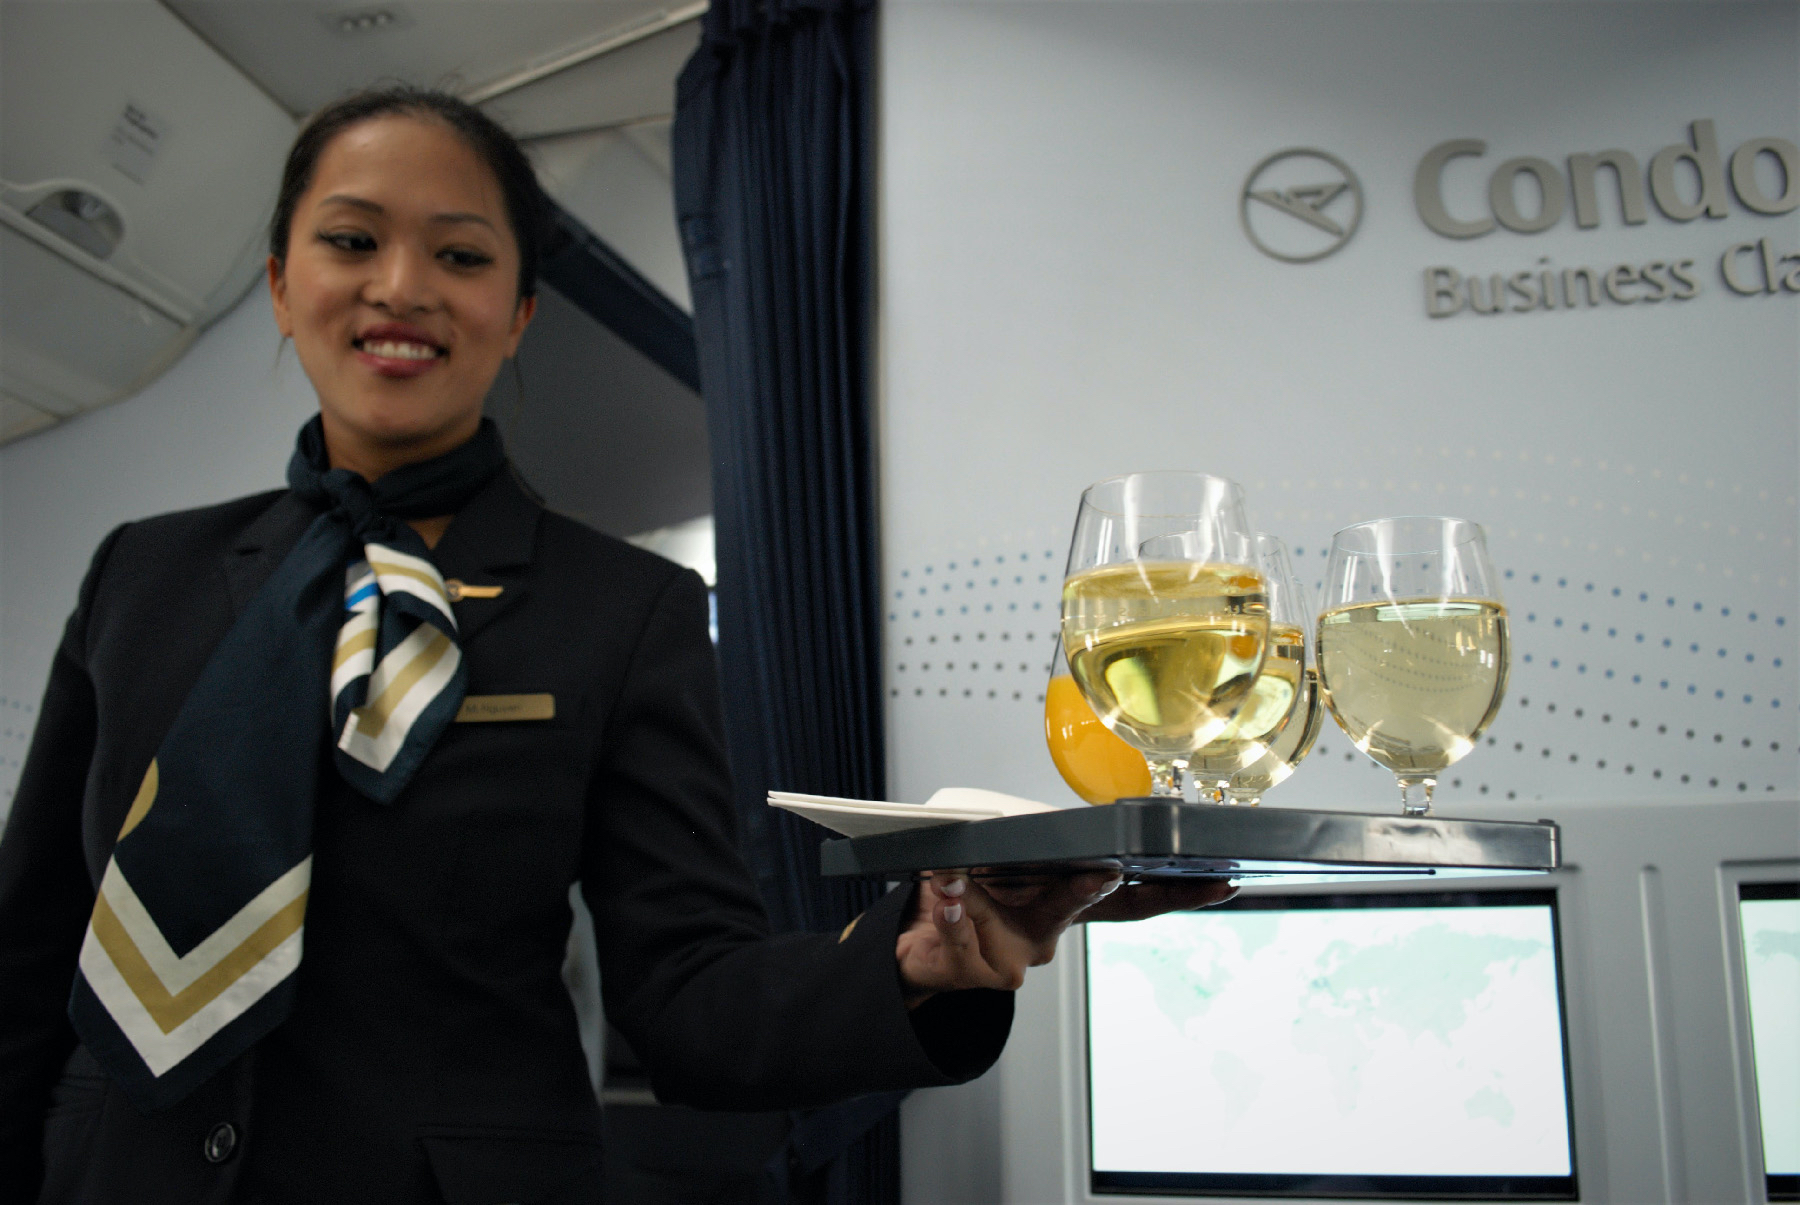 A flight attendant on Condor Airlines offers beverages to passengers en route from Frankfurt, Germany, to Los Angeles.